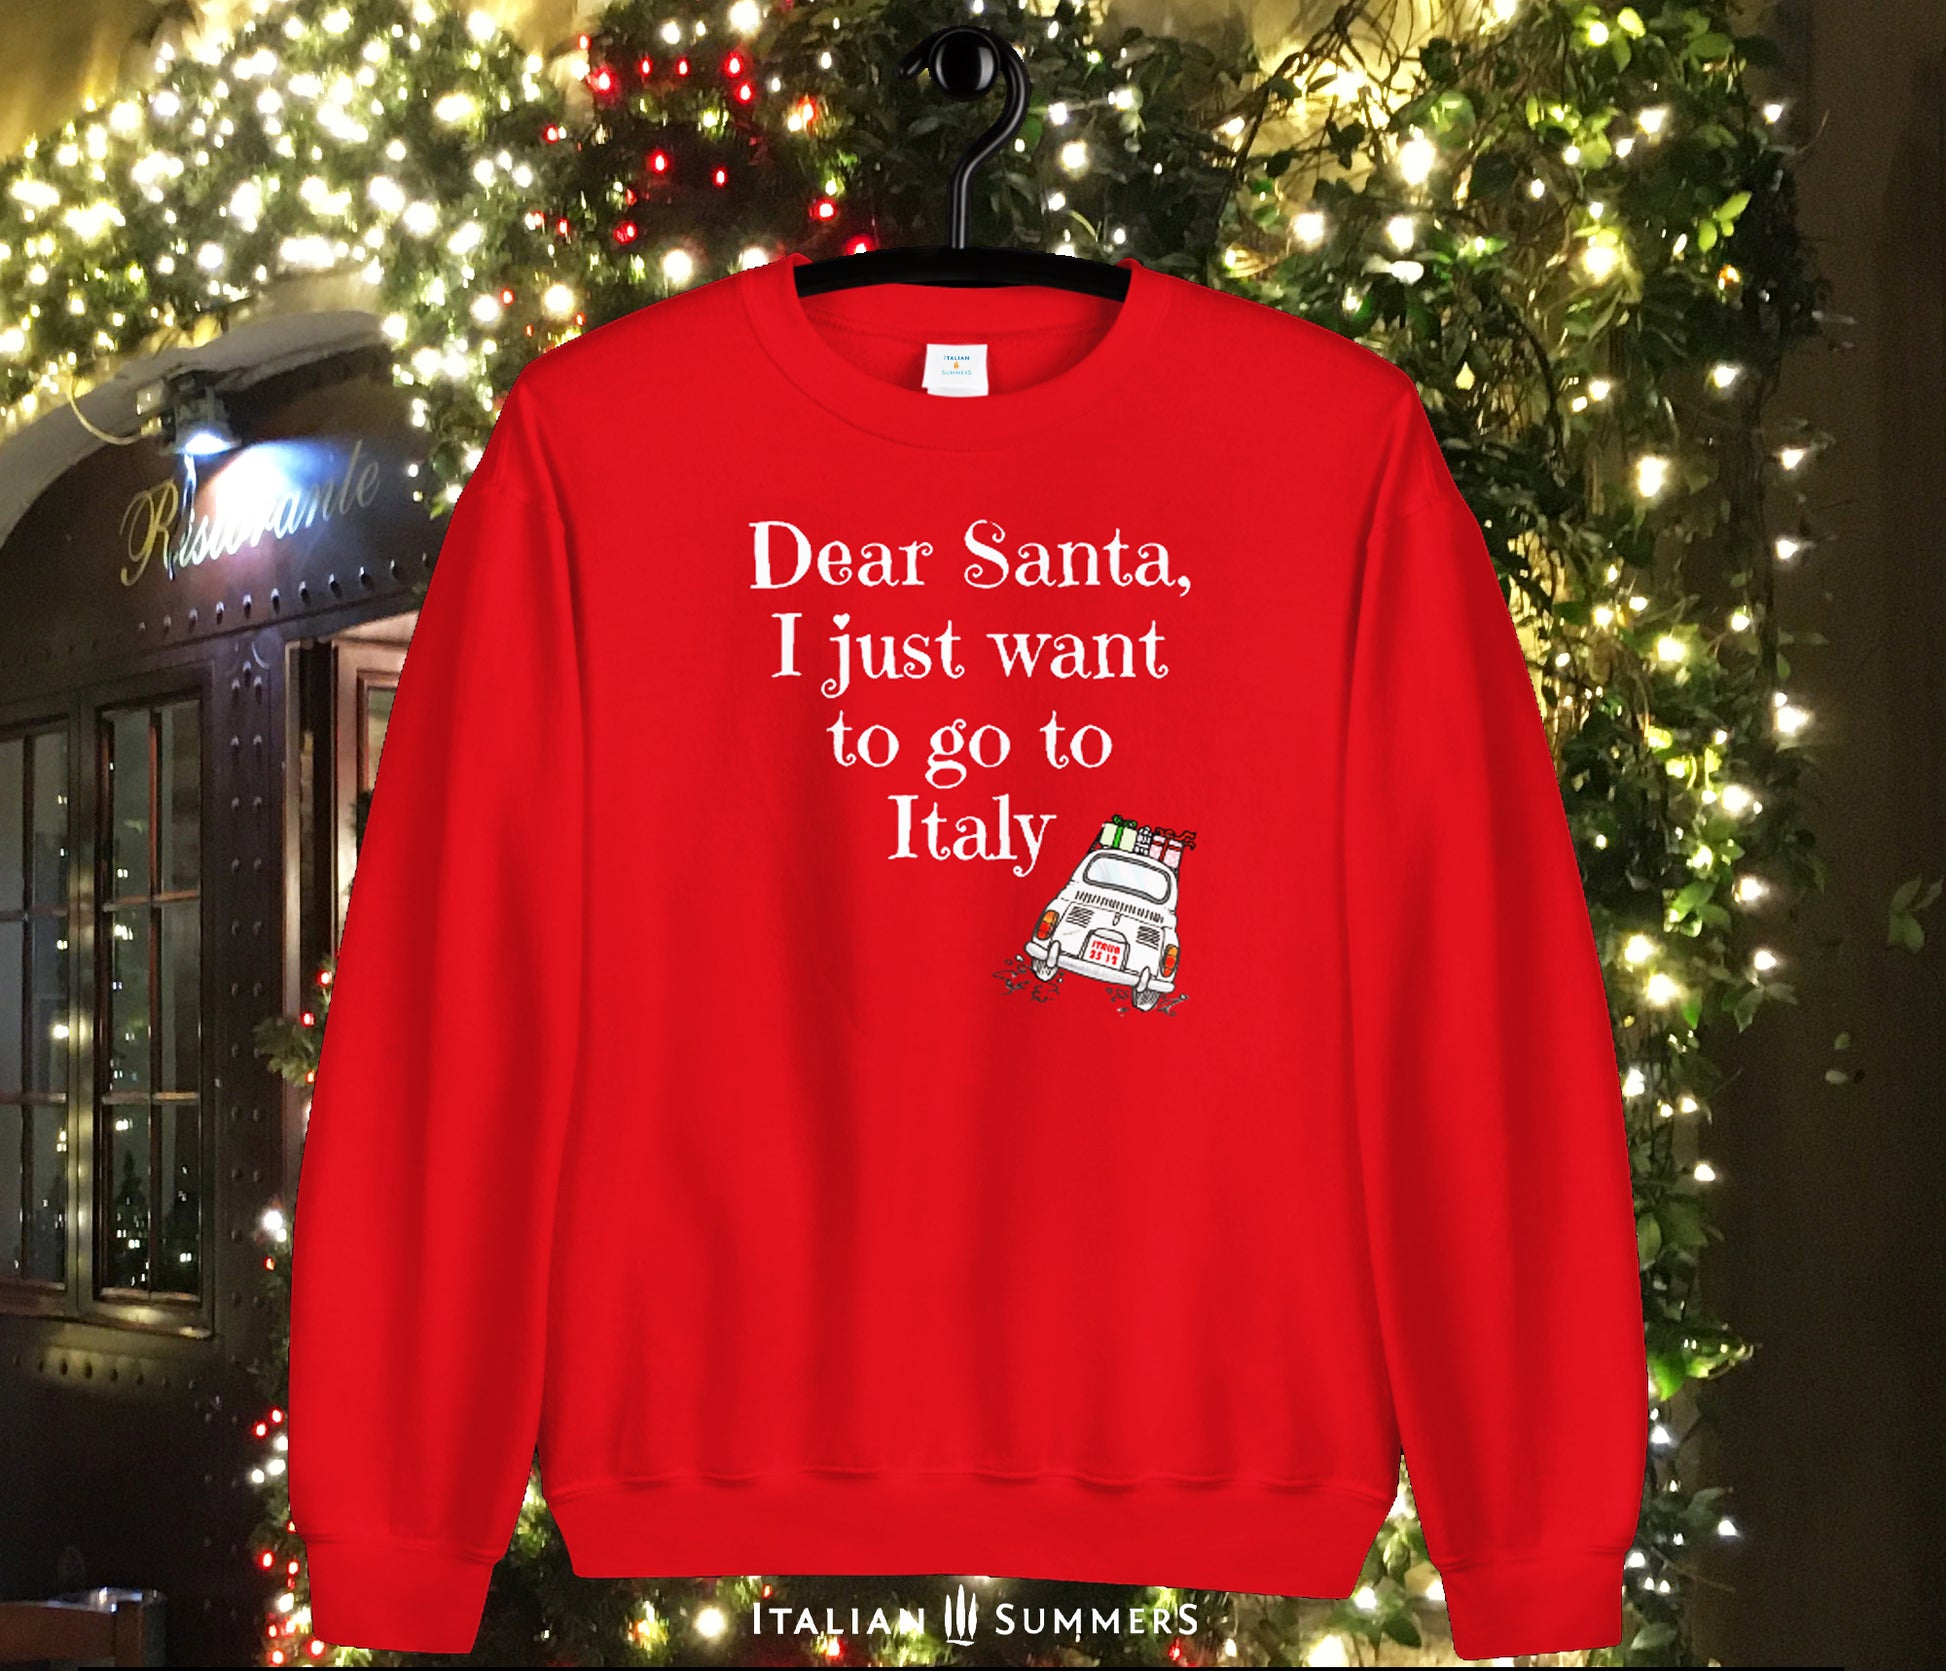 A  soft, comfy and cozy Italy-Christmas inspired sweatshirt. It features the fun phrase: "Dear Santa, I just want to go to Italy", and a vintage Fiat 500 speeding away loaded with wrapped Christmas gifts: Buon Natale!